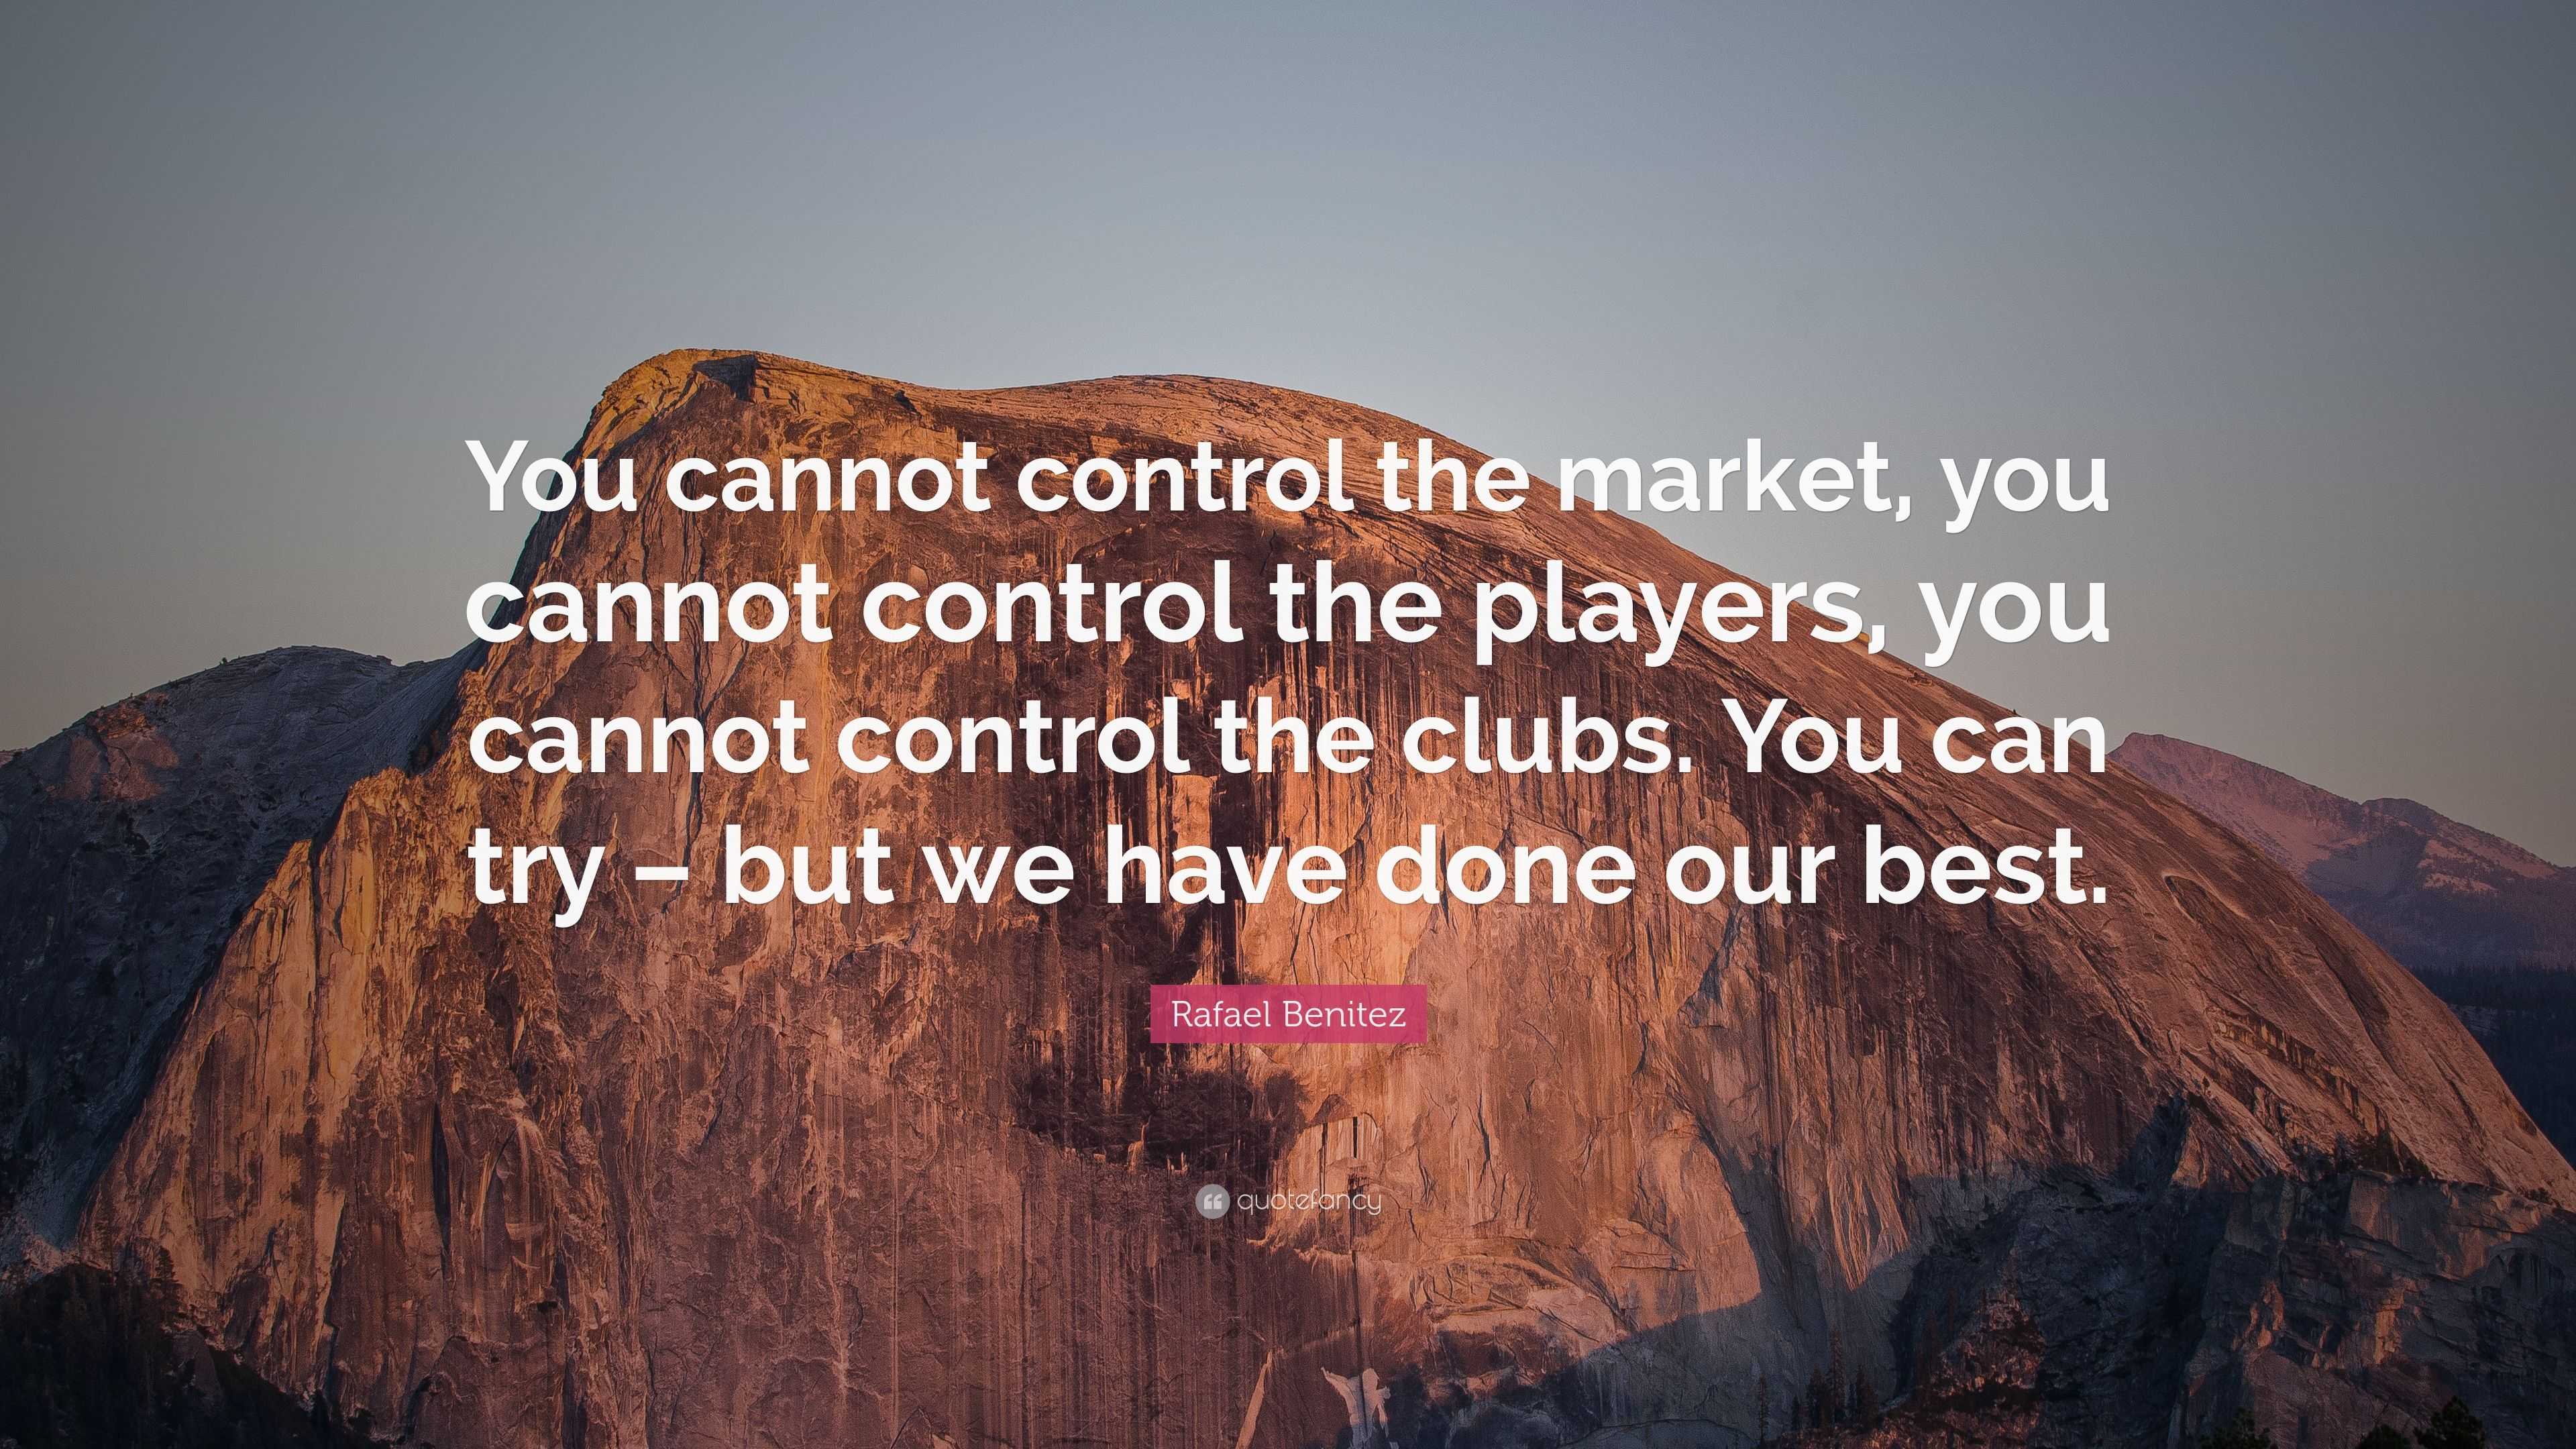 Rafael Benitez Quote: “You cannot control the market, you cannot ...